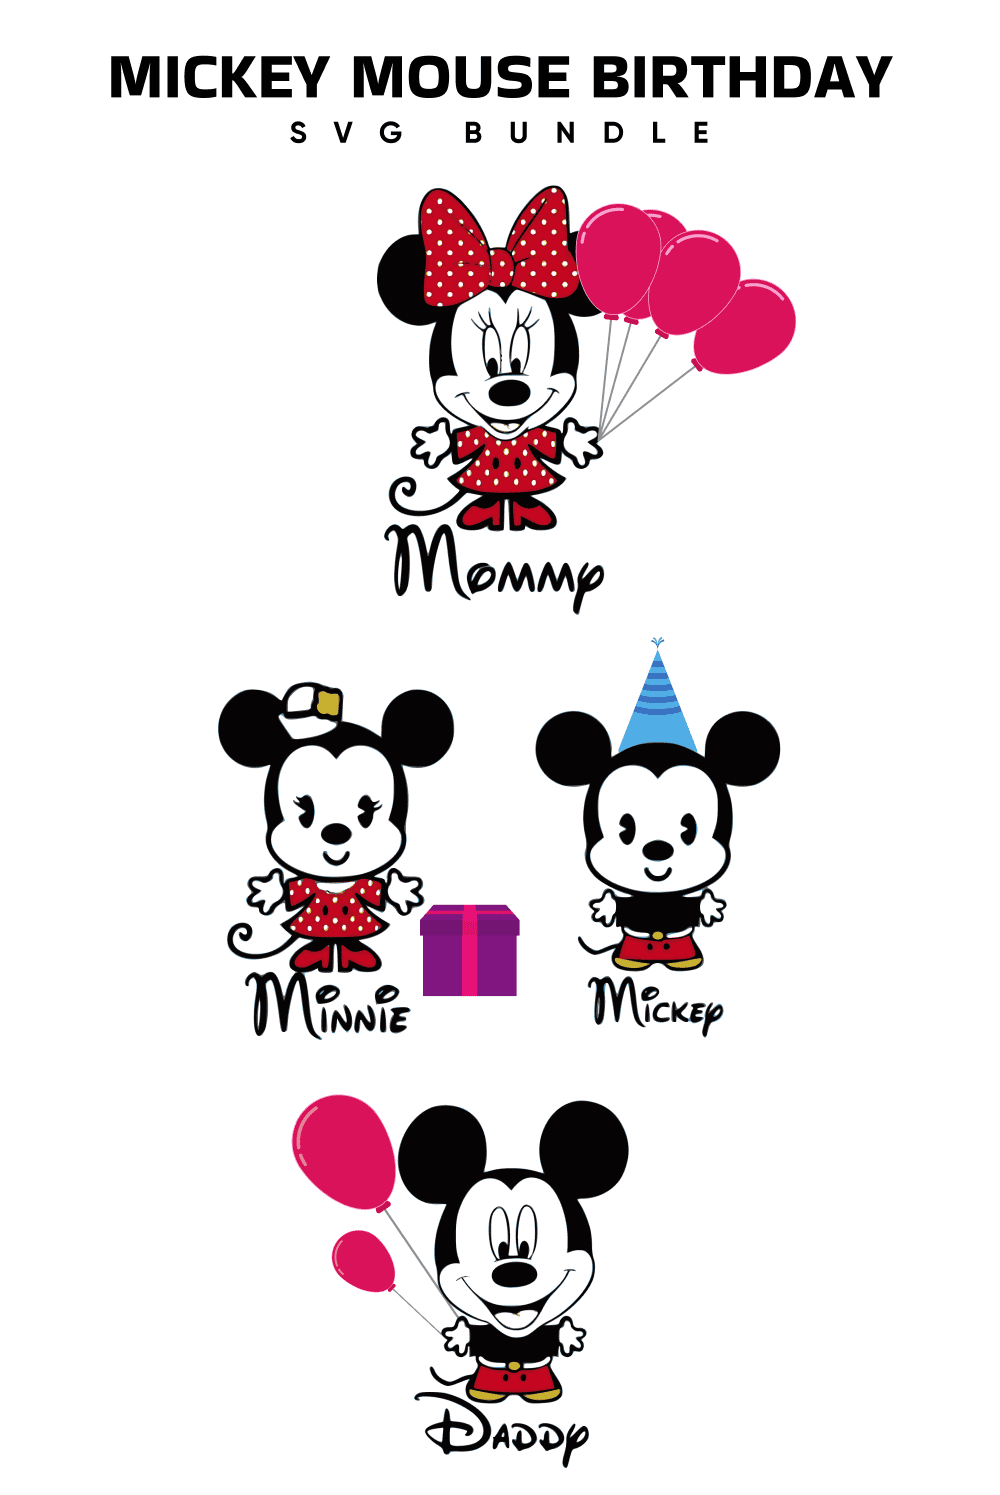 A selection of gorgeous images birthday of Minnie Mouse and Mickey Mouse